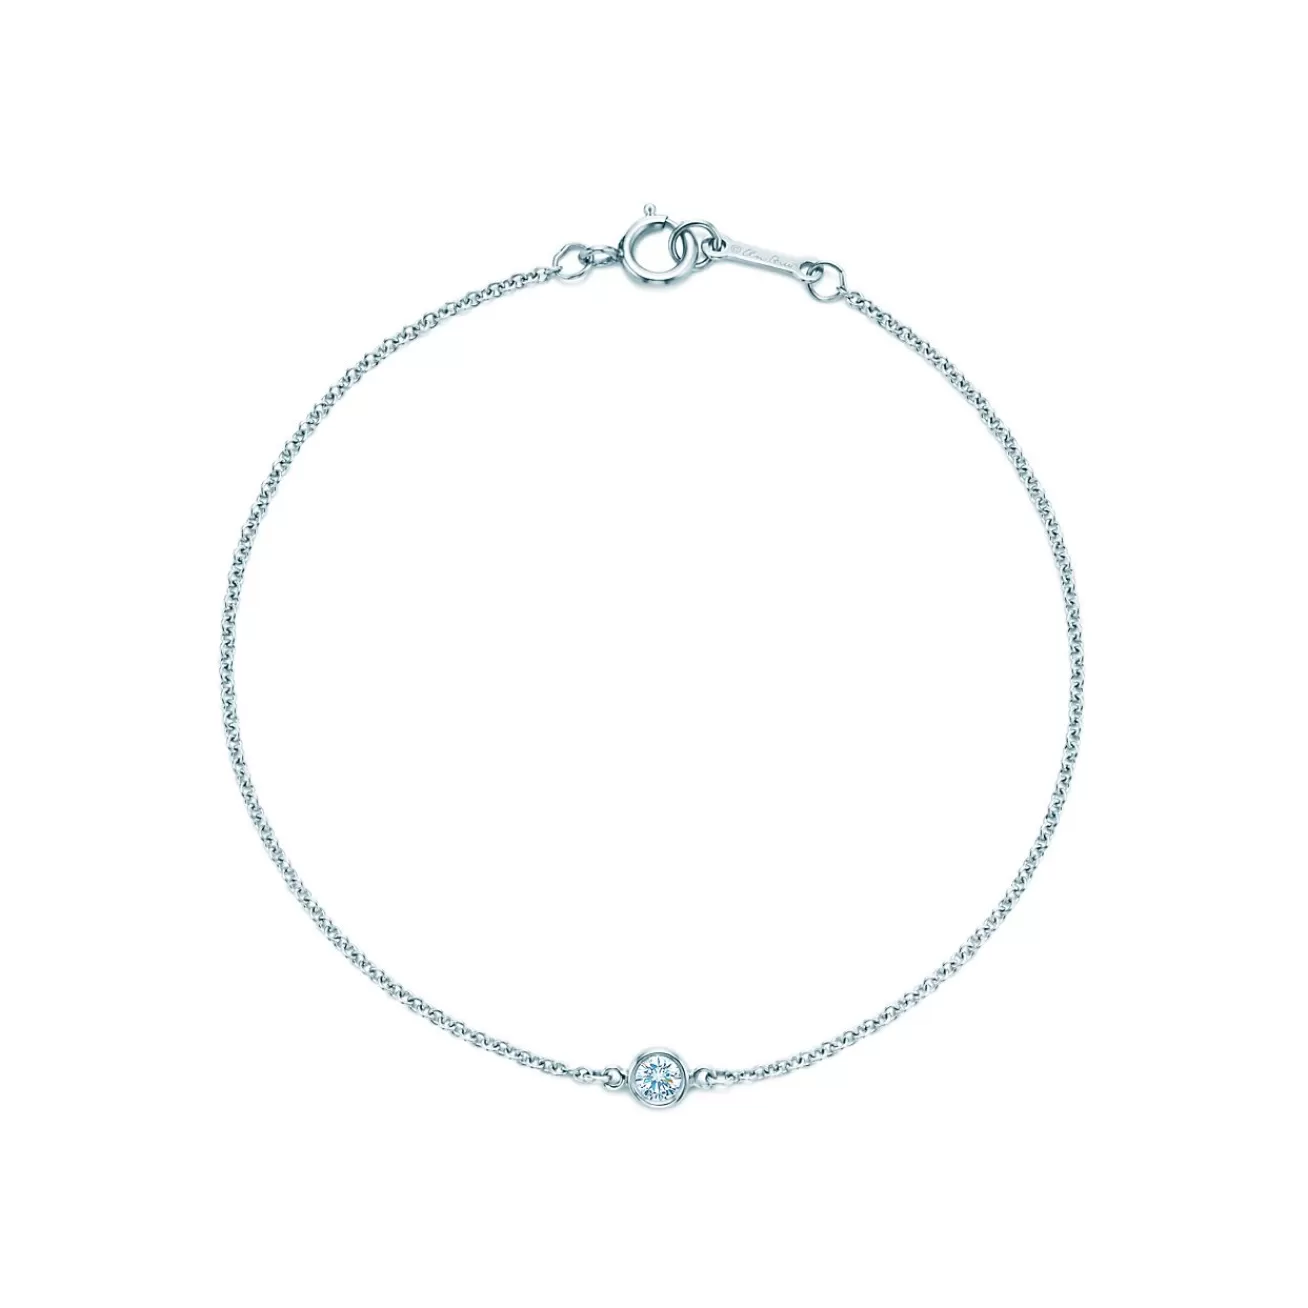 Tiffany & Co. Elsa Peretti® Diamonds by the Yard® bracelet in platinum. | ^ Bracelets | Gifts for Her